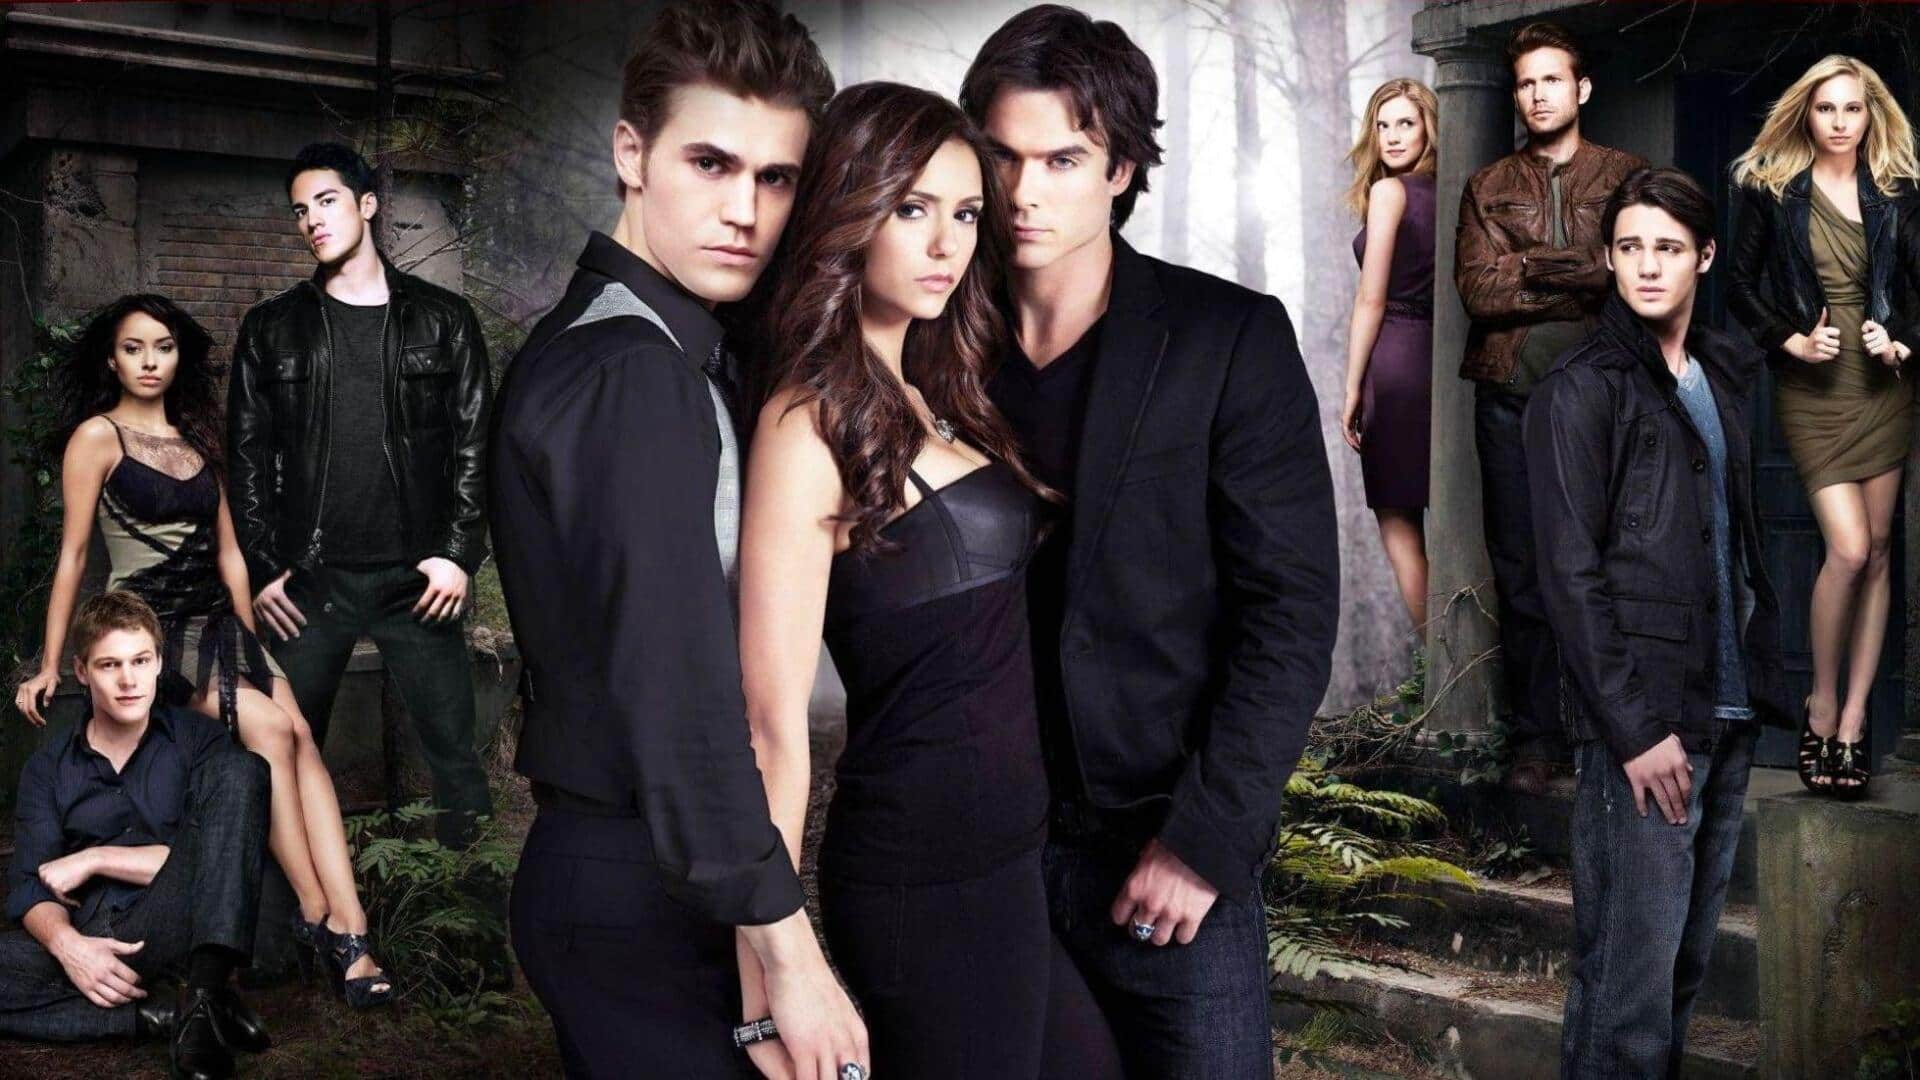 14 years of 'The Vampire Diaries': Most-acclaimed episodes per IMDb